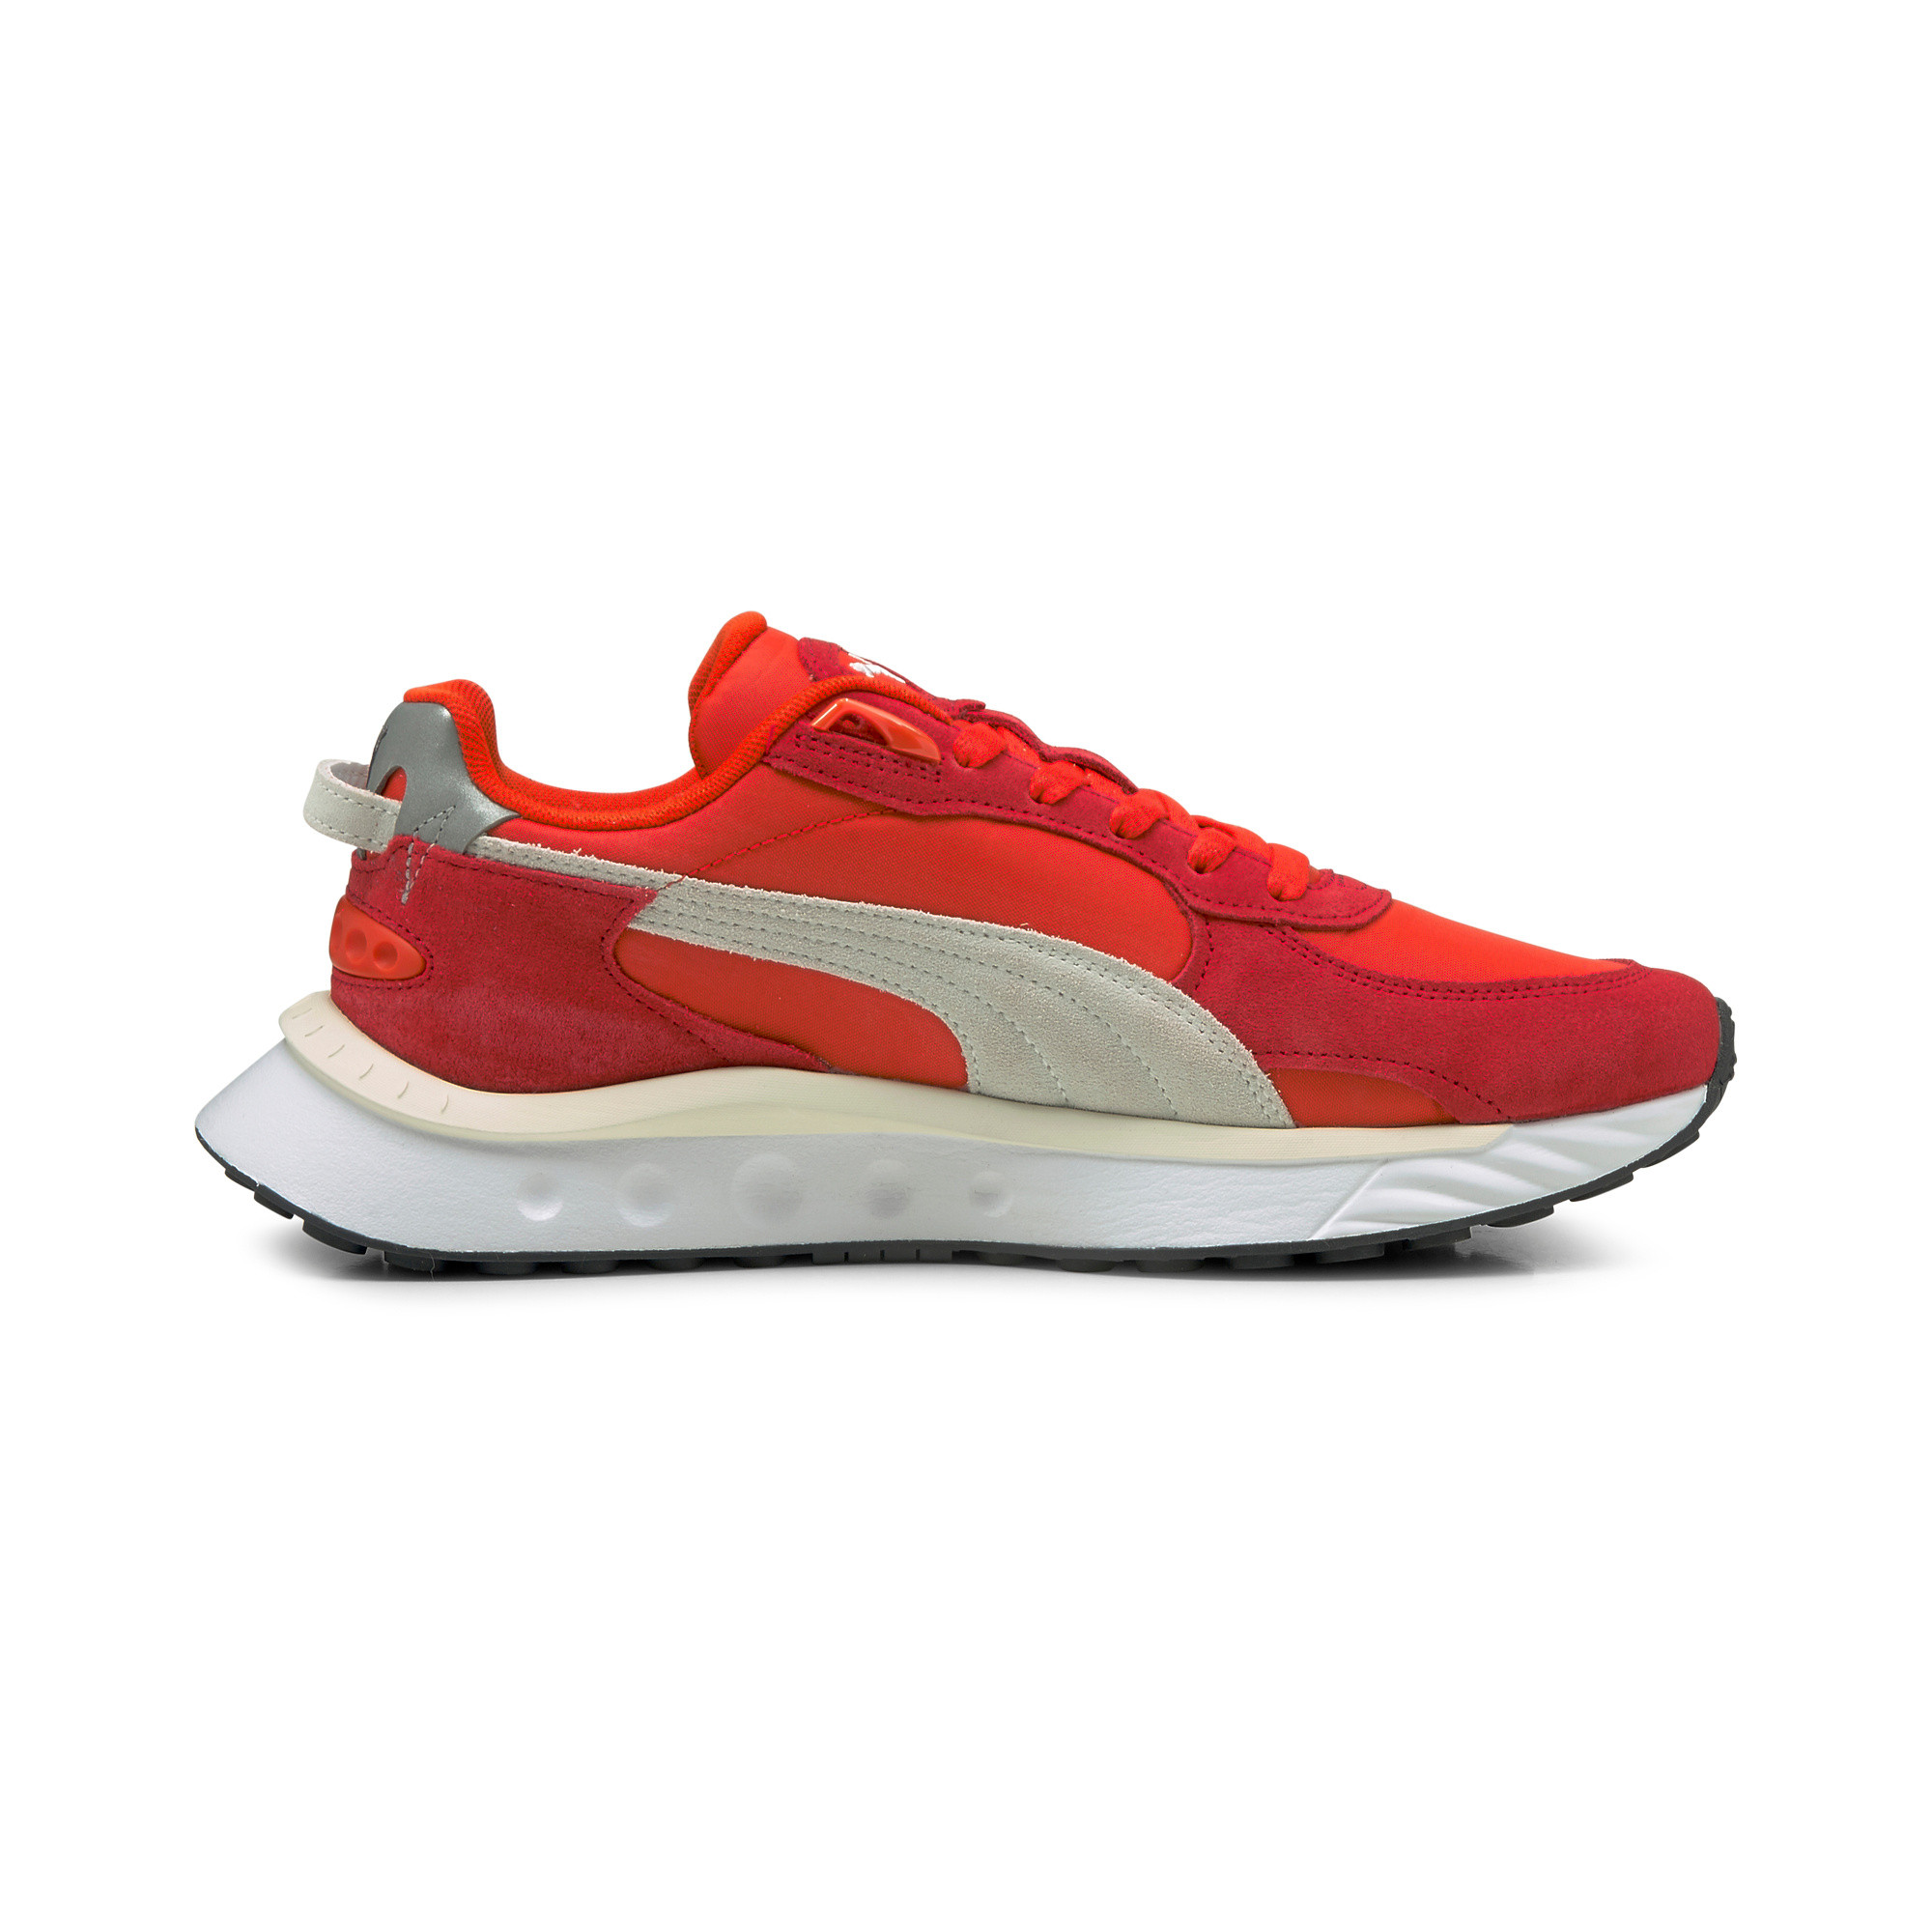 Sneakers PUMA, Rosso, large image number 1